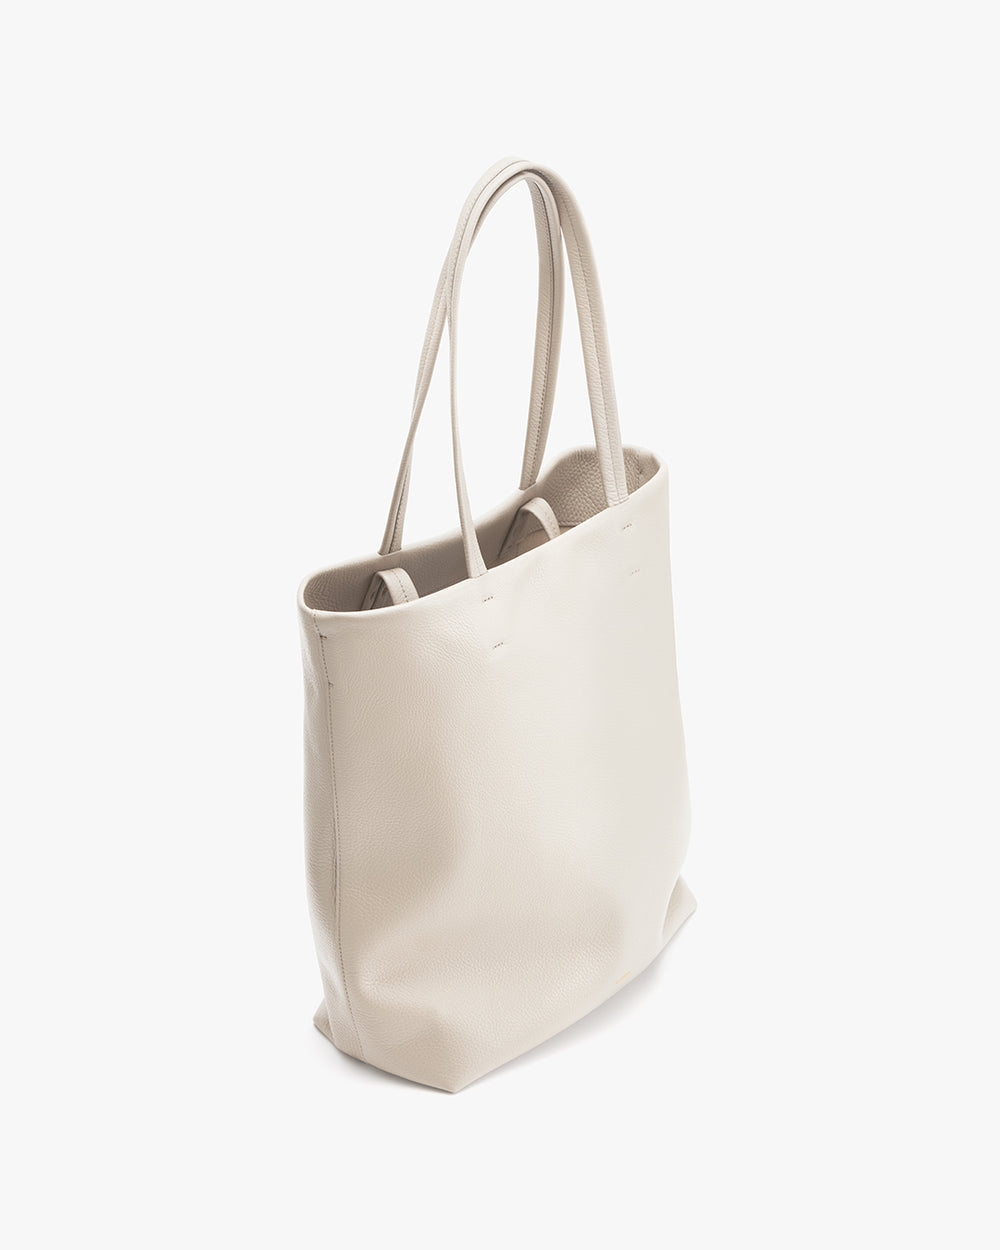 Upright tote bag with handles and a smooth texture